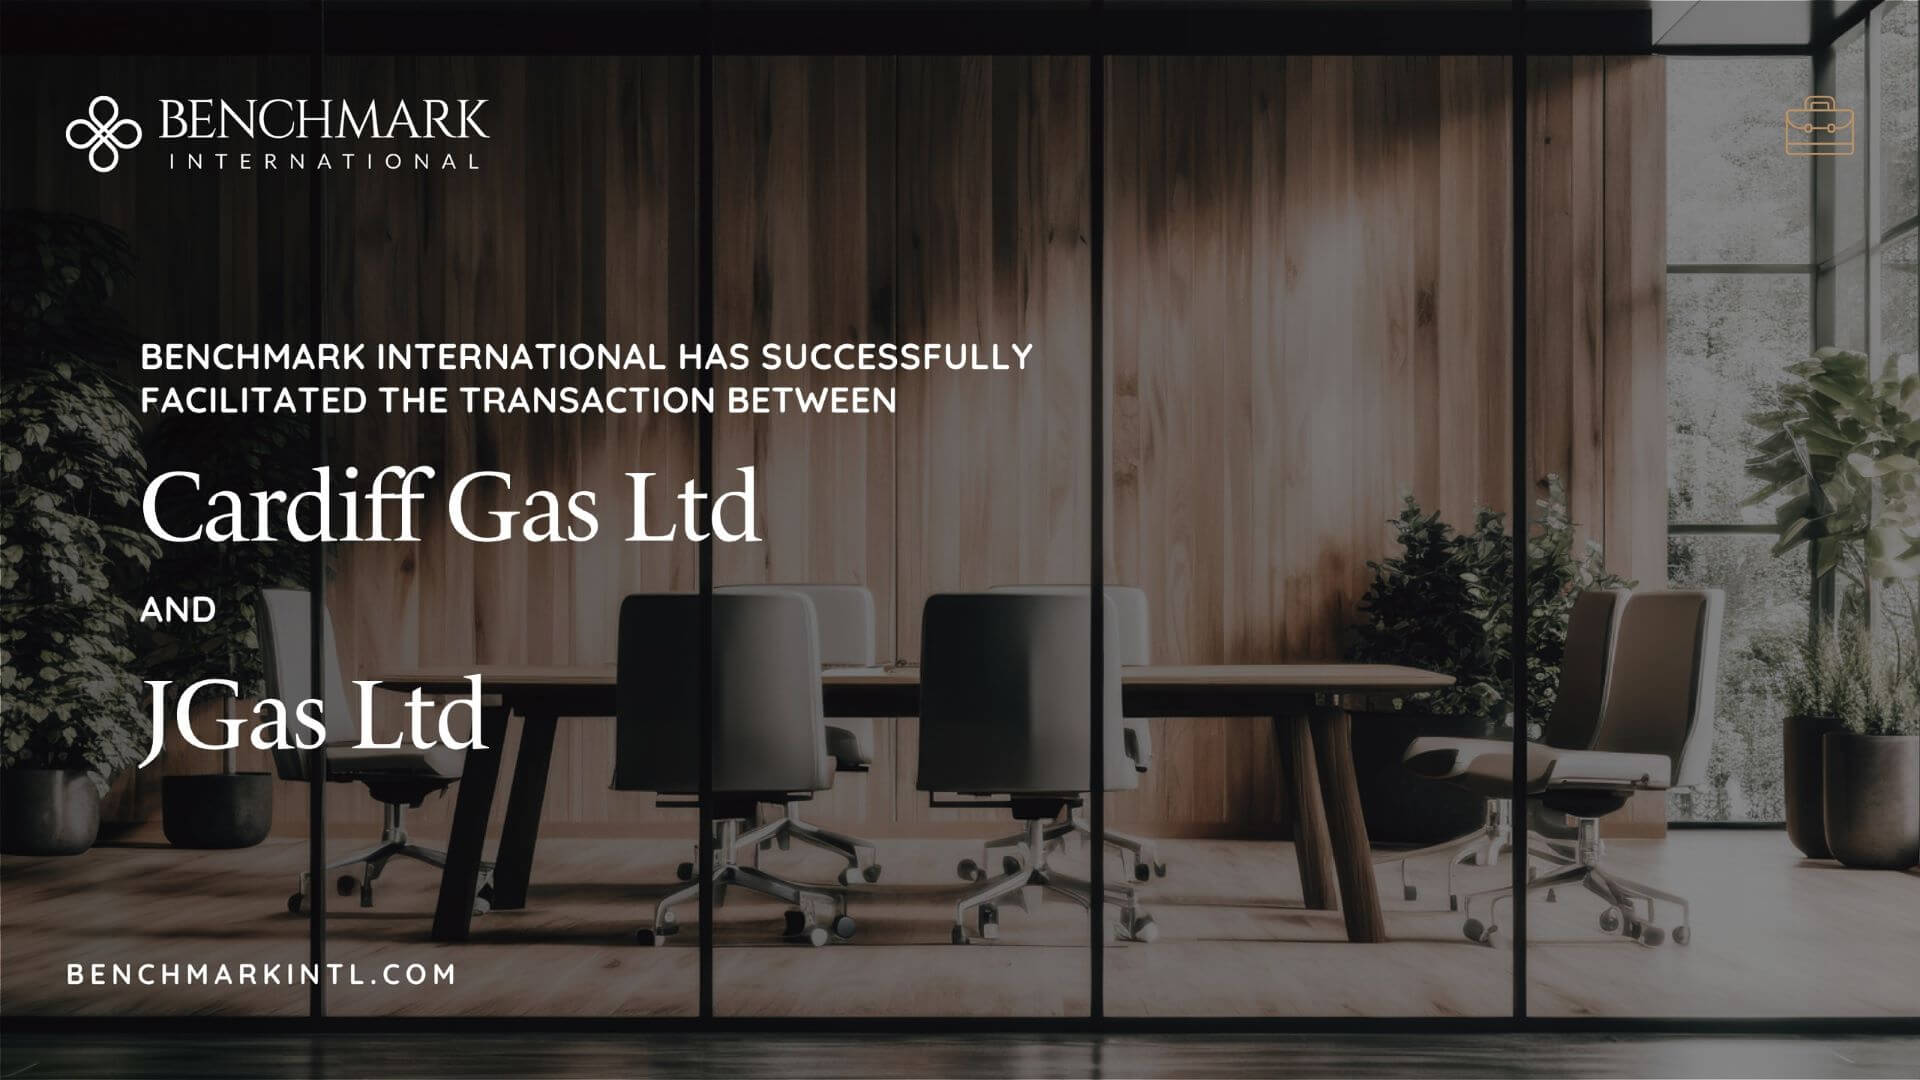 Benchmark International Successfully Facilitated the Transaction Between Cardiff Gas Ltd and JGas Ltd